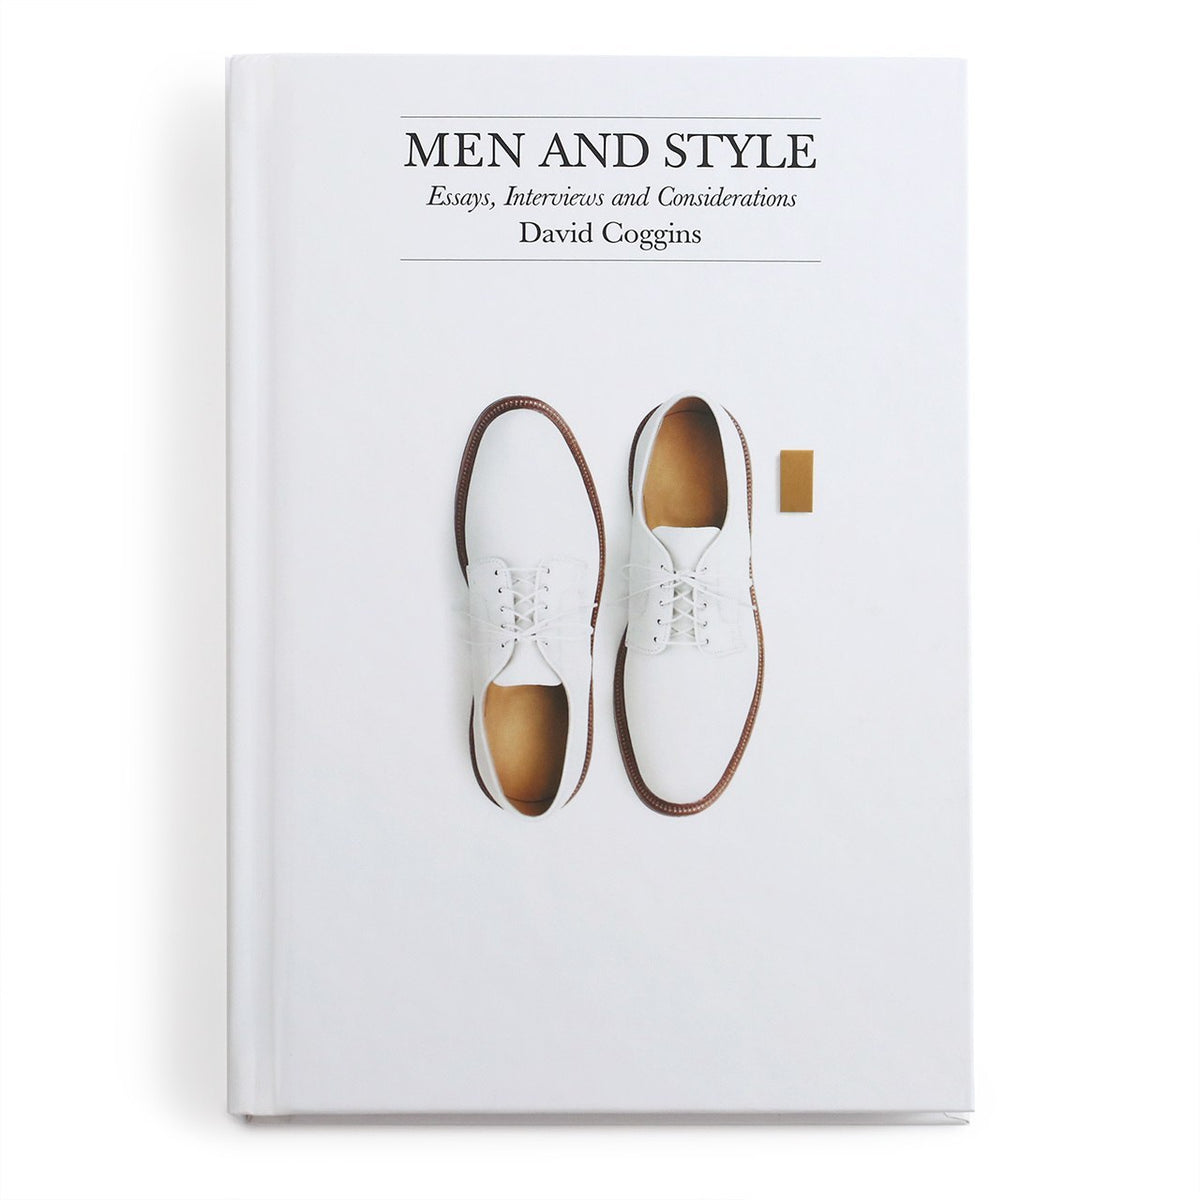 Men and Style: Essays, Interviews and Considerations by David Coggins